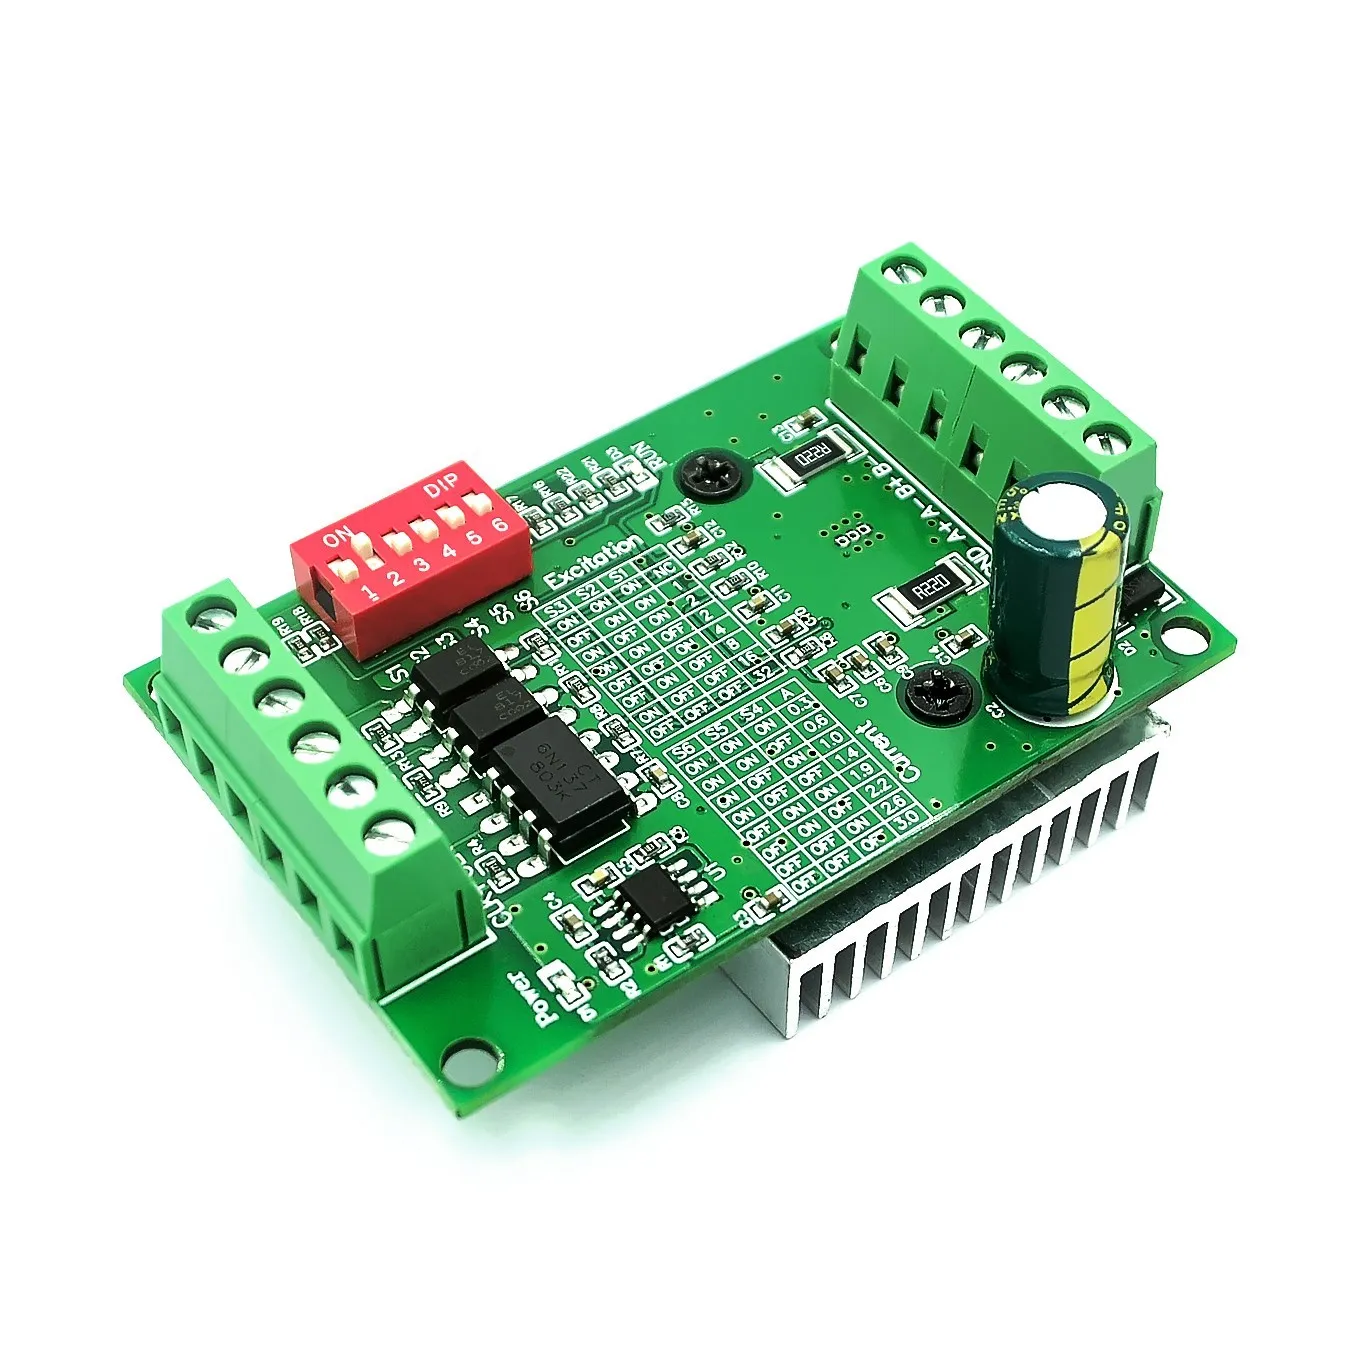 TB6560 Driver Board CNC Router Single 1 Axis Controller Stepper Motor Drivers 3A 